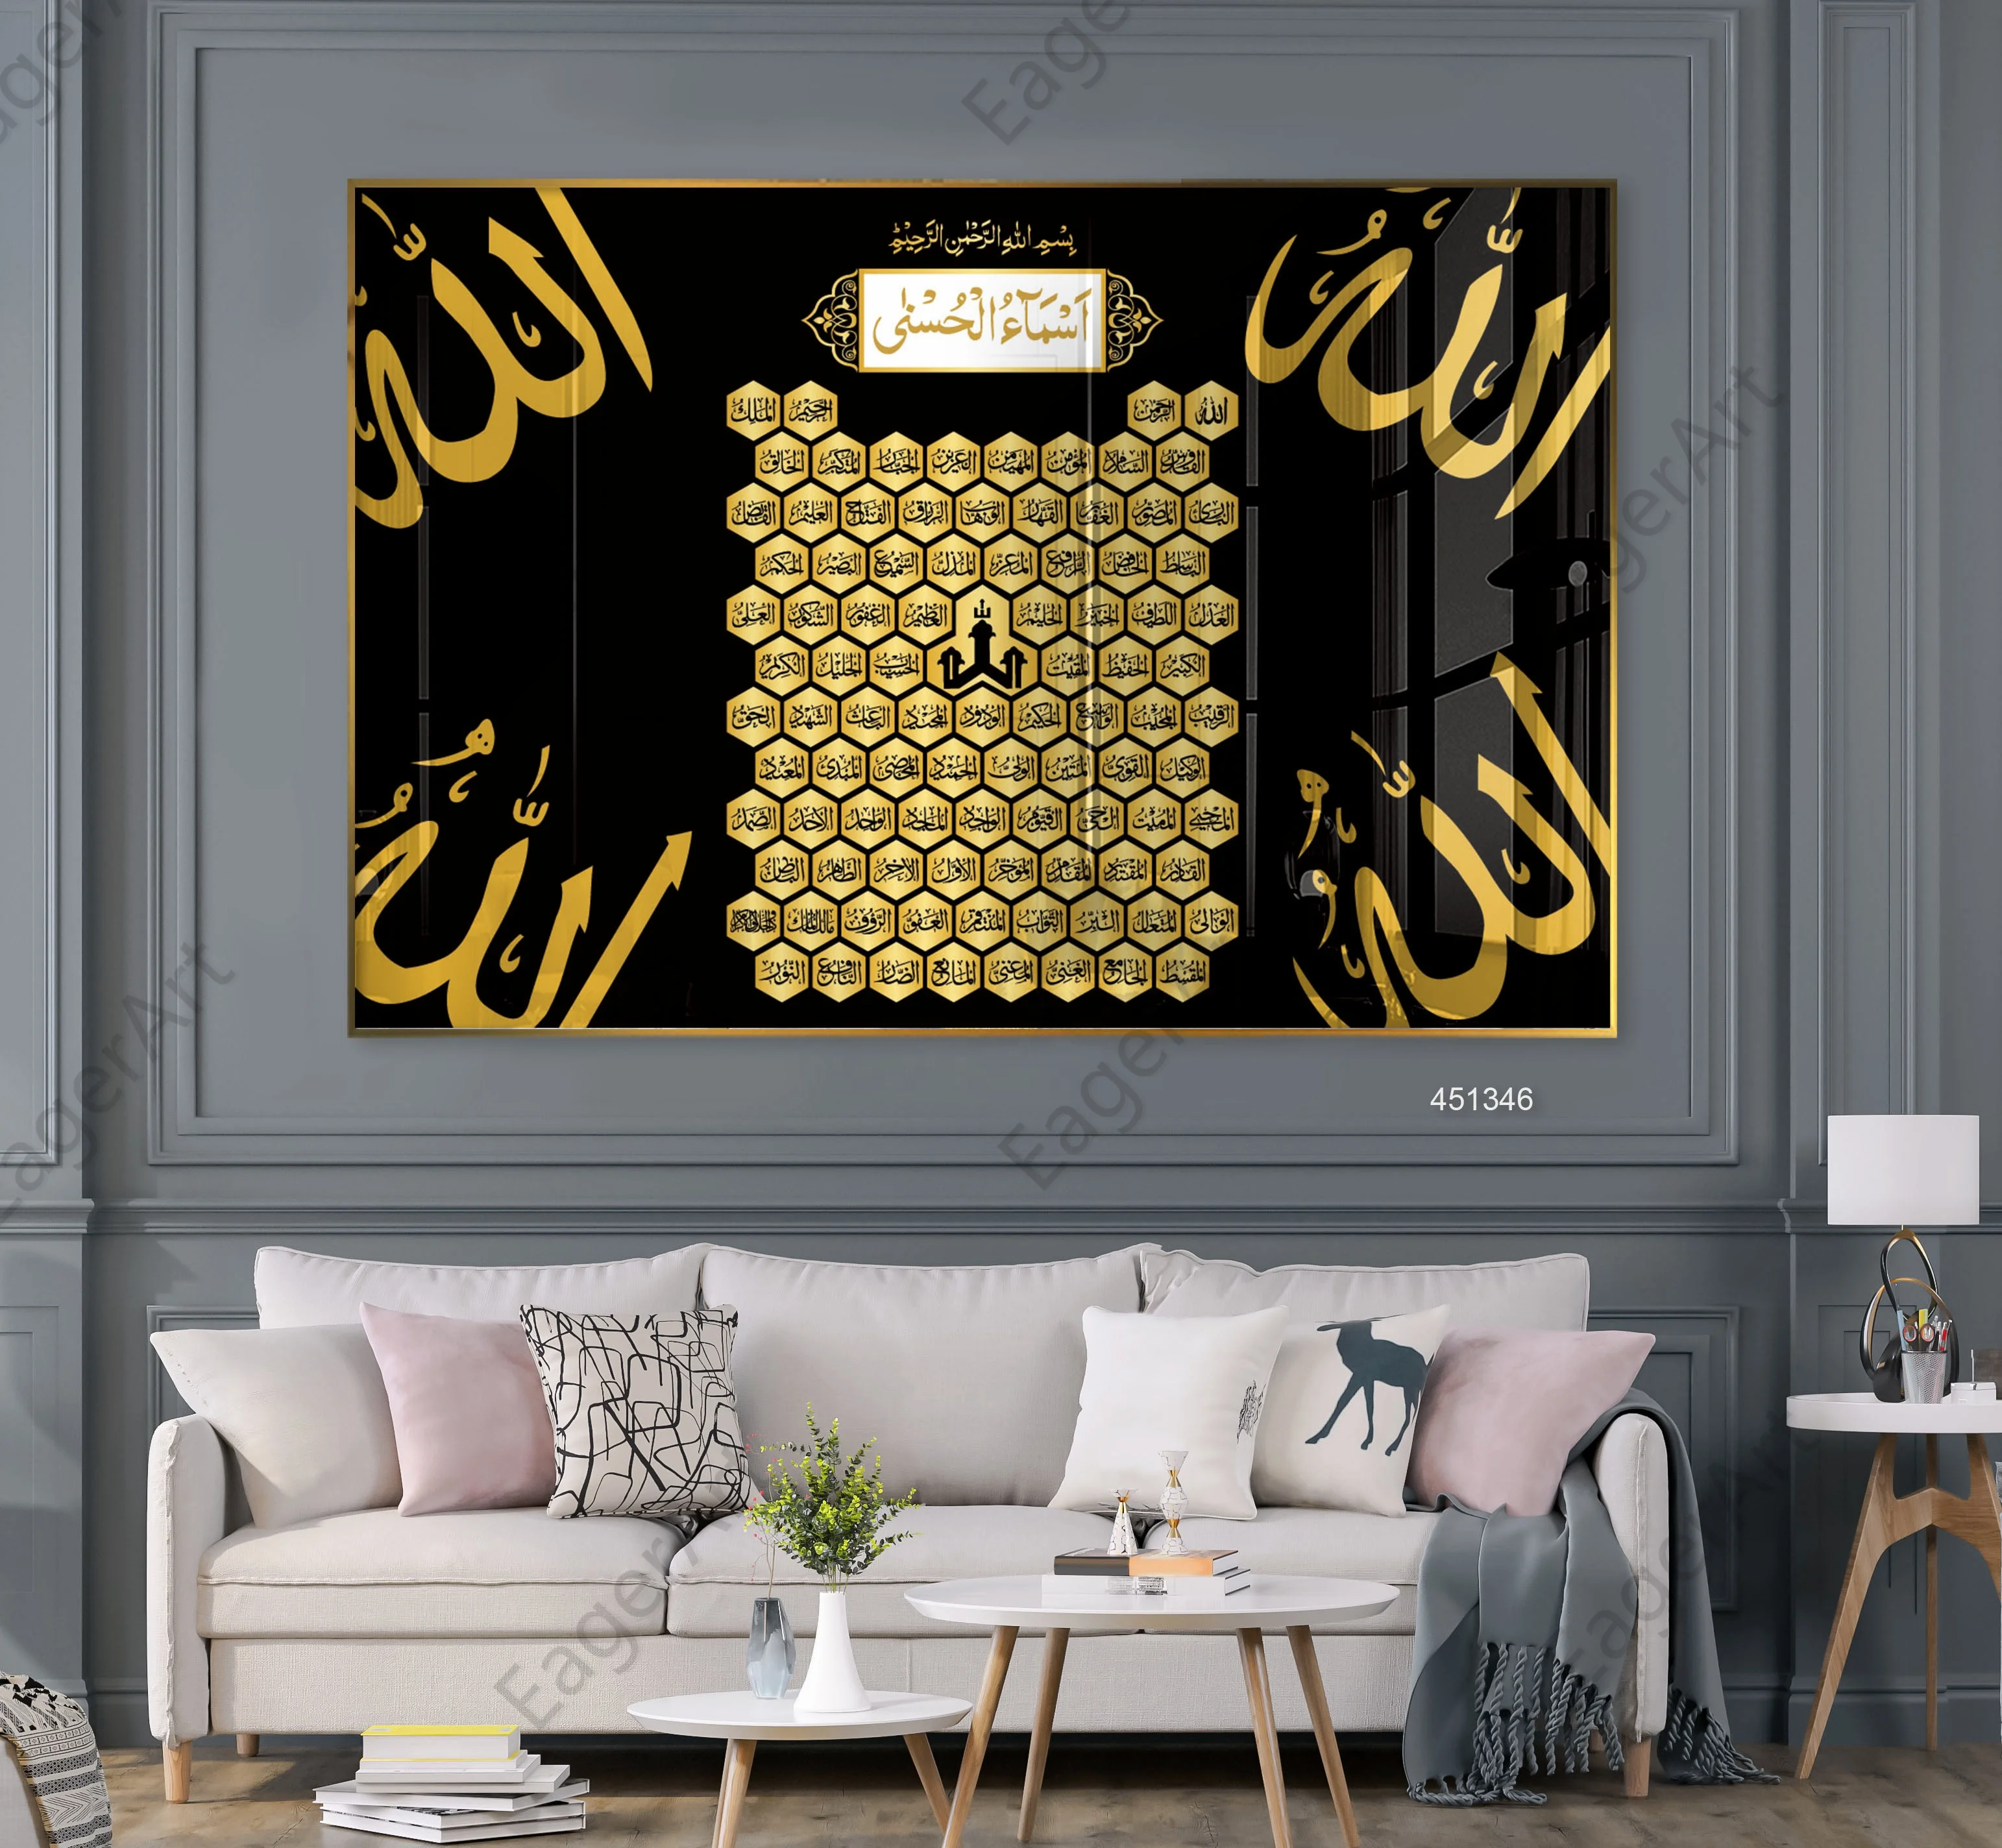 

Islamic Wall Art UV Printing on Acrylic With Metal Framed Resin Painting Black and White Art Print 98 Calligraphy